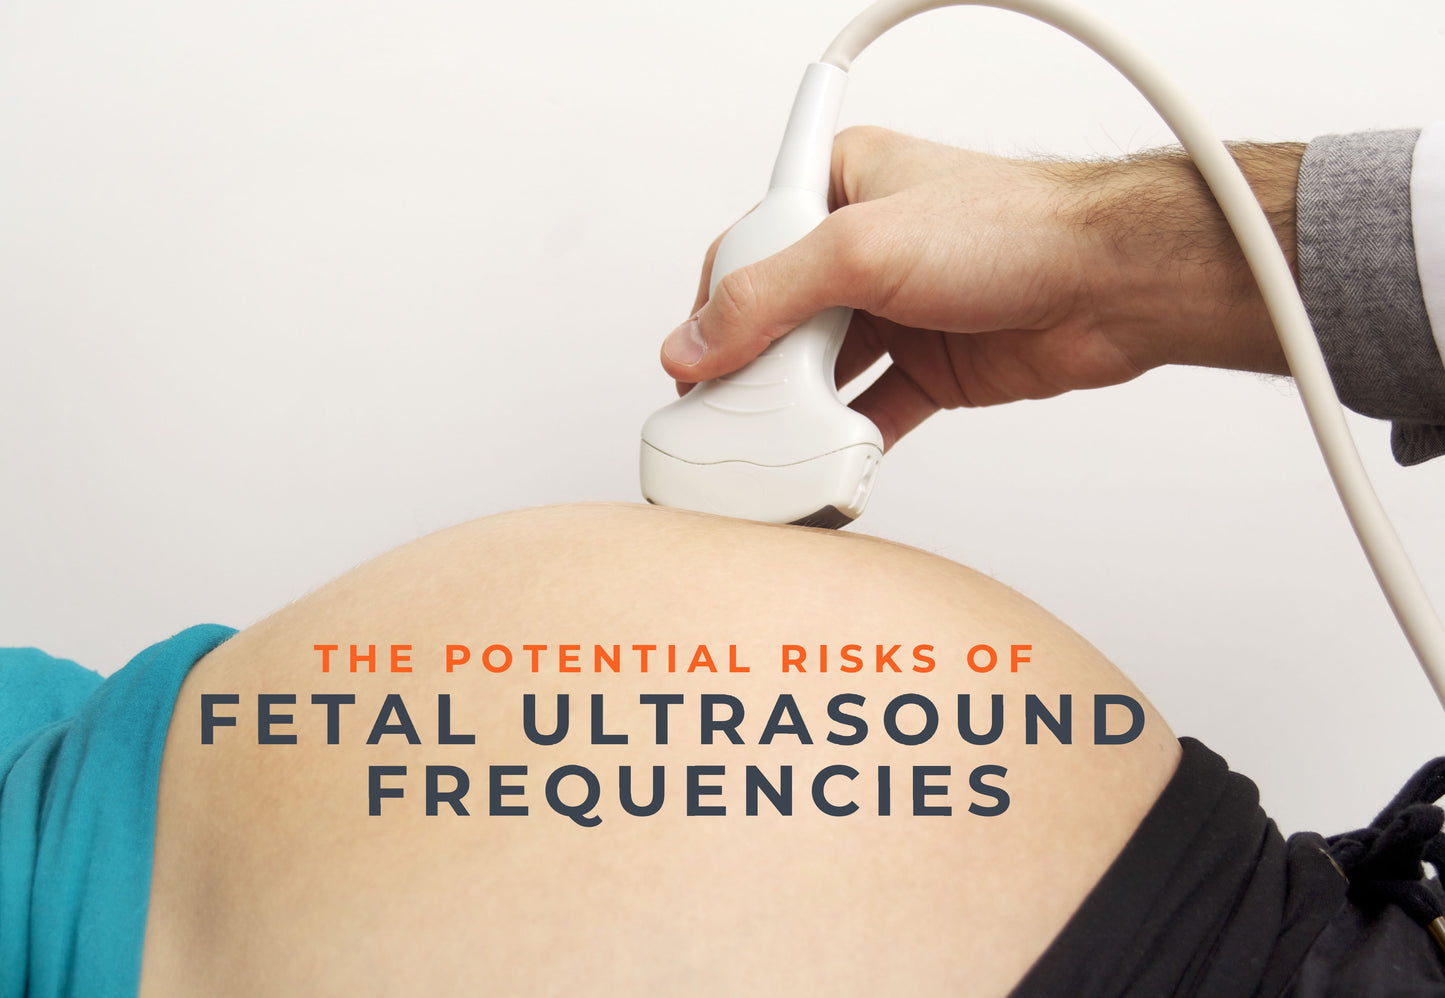 The Potential Risks of Fetal Ultrasound Frequencies